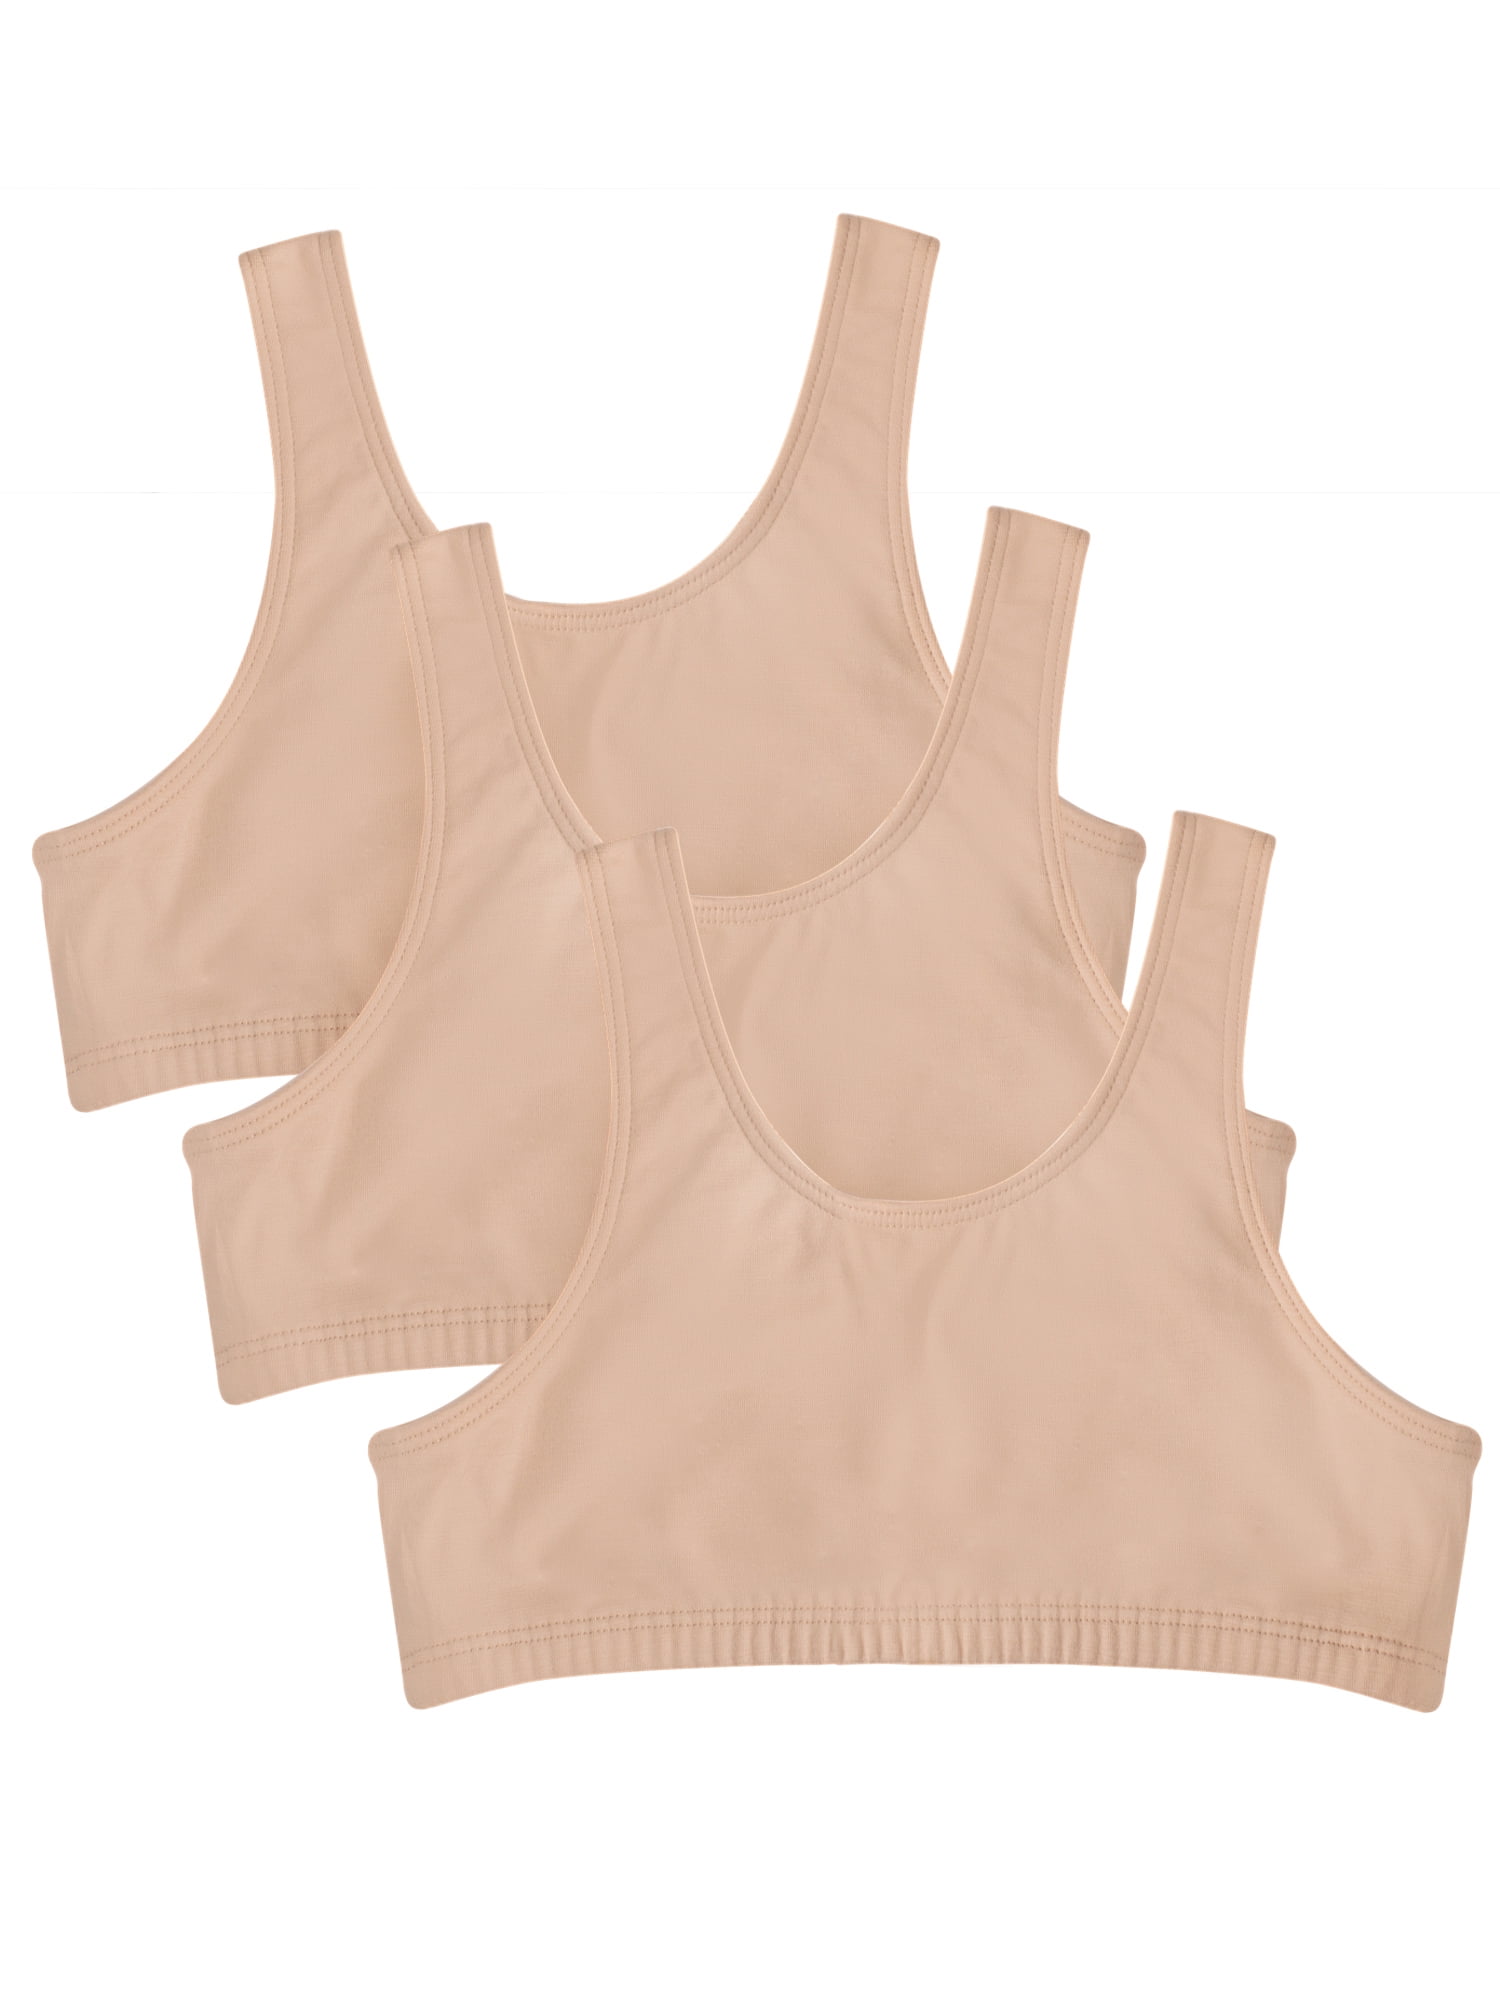 Buy Fruit of the Loom Girls Pull Over Built Up Strap Cotton Sport Bra, 3- Pack, Sizes 28-38 Online at Lowest Price in Ubuy Algeria. 876829024